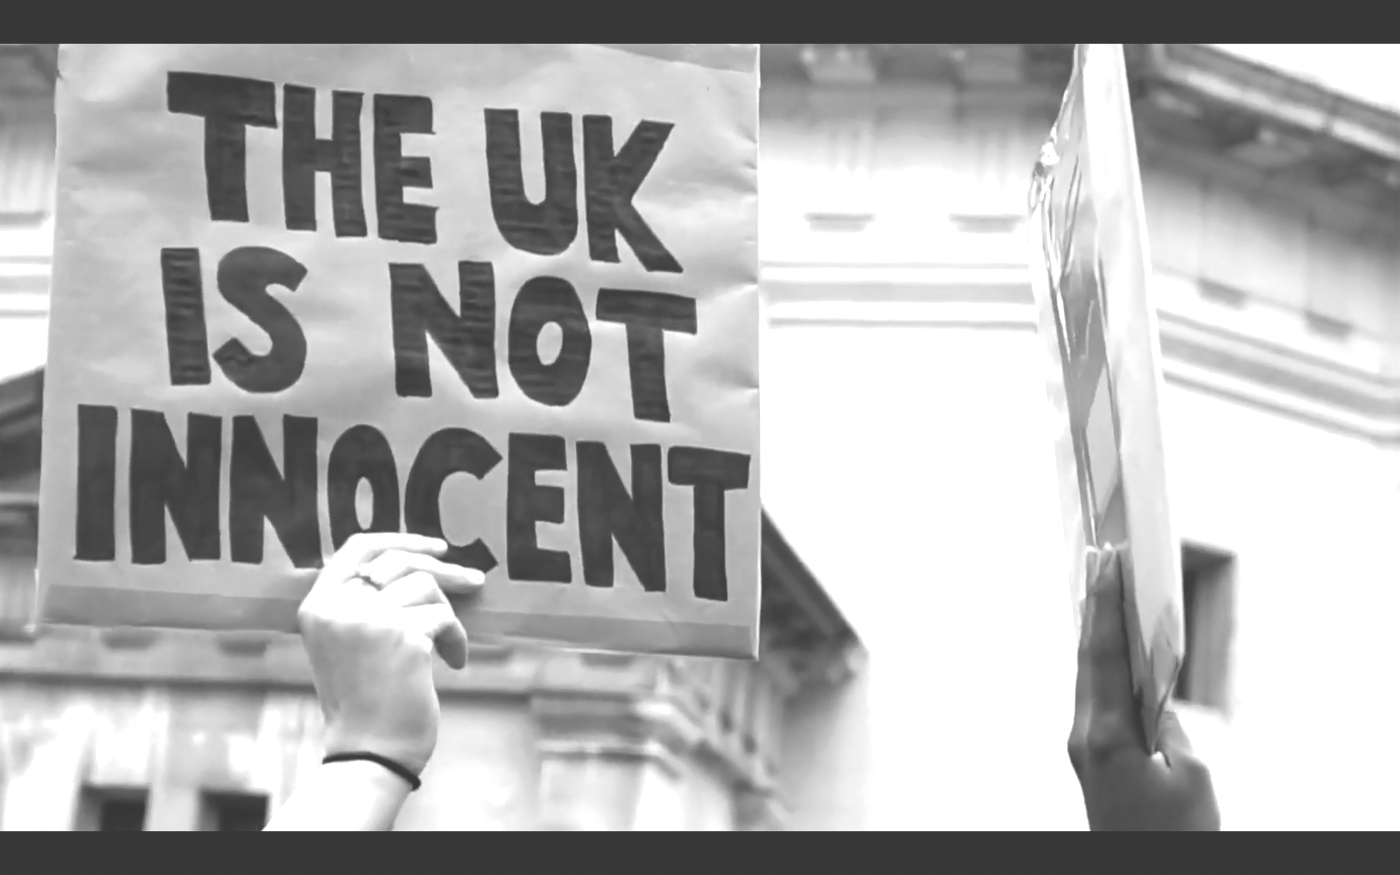 Still from Alberta Whittle’s film ‘Holding the line’. A white hand holds up a sign saying “The UK is not innocent”. Next to them a black hand is holding a sign sideways that is not readable from that angle.